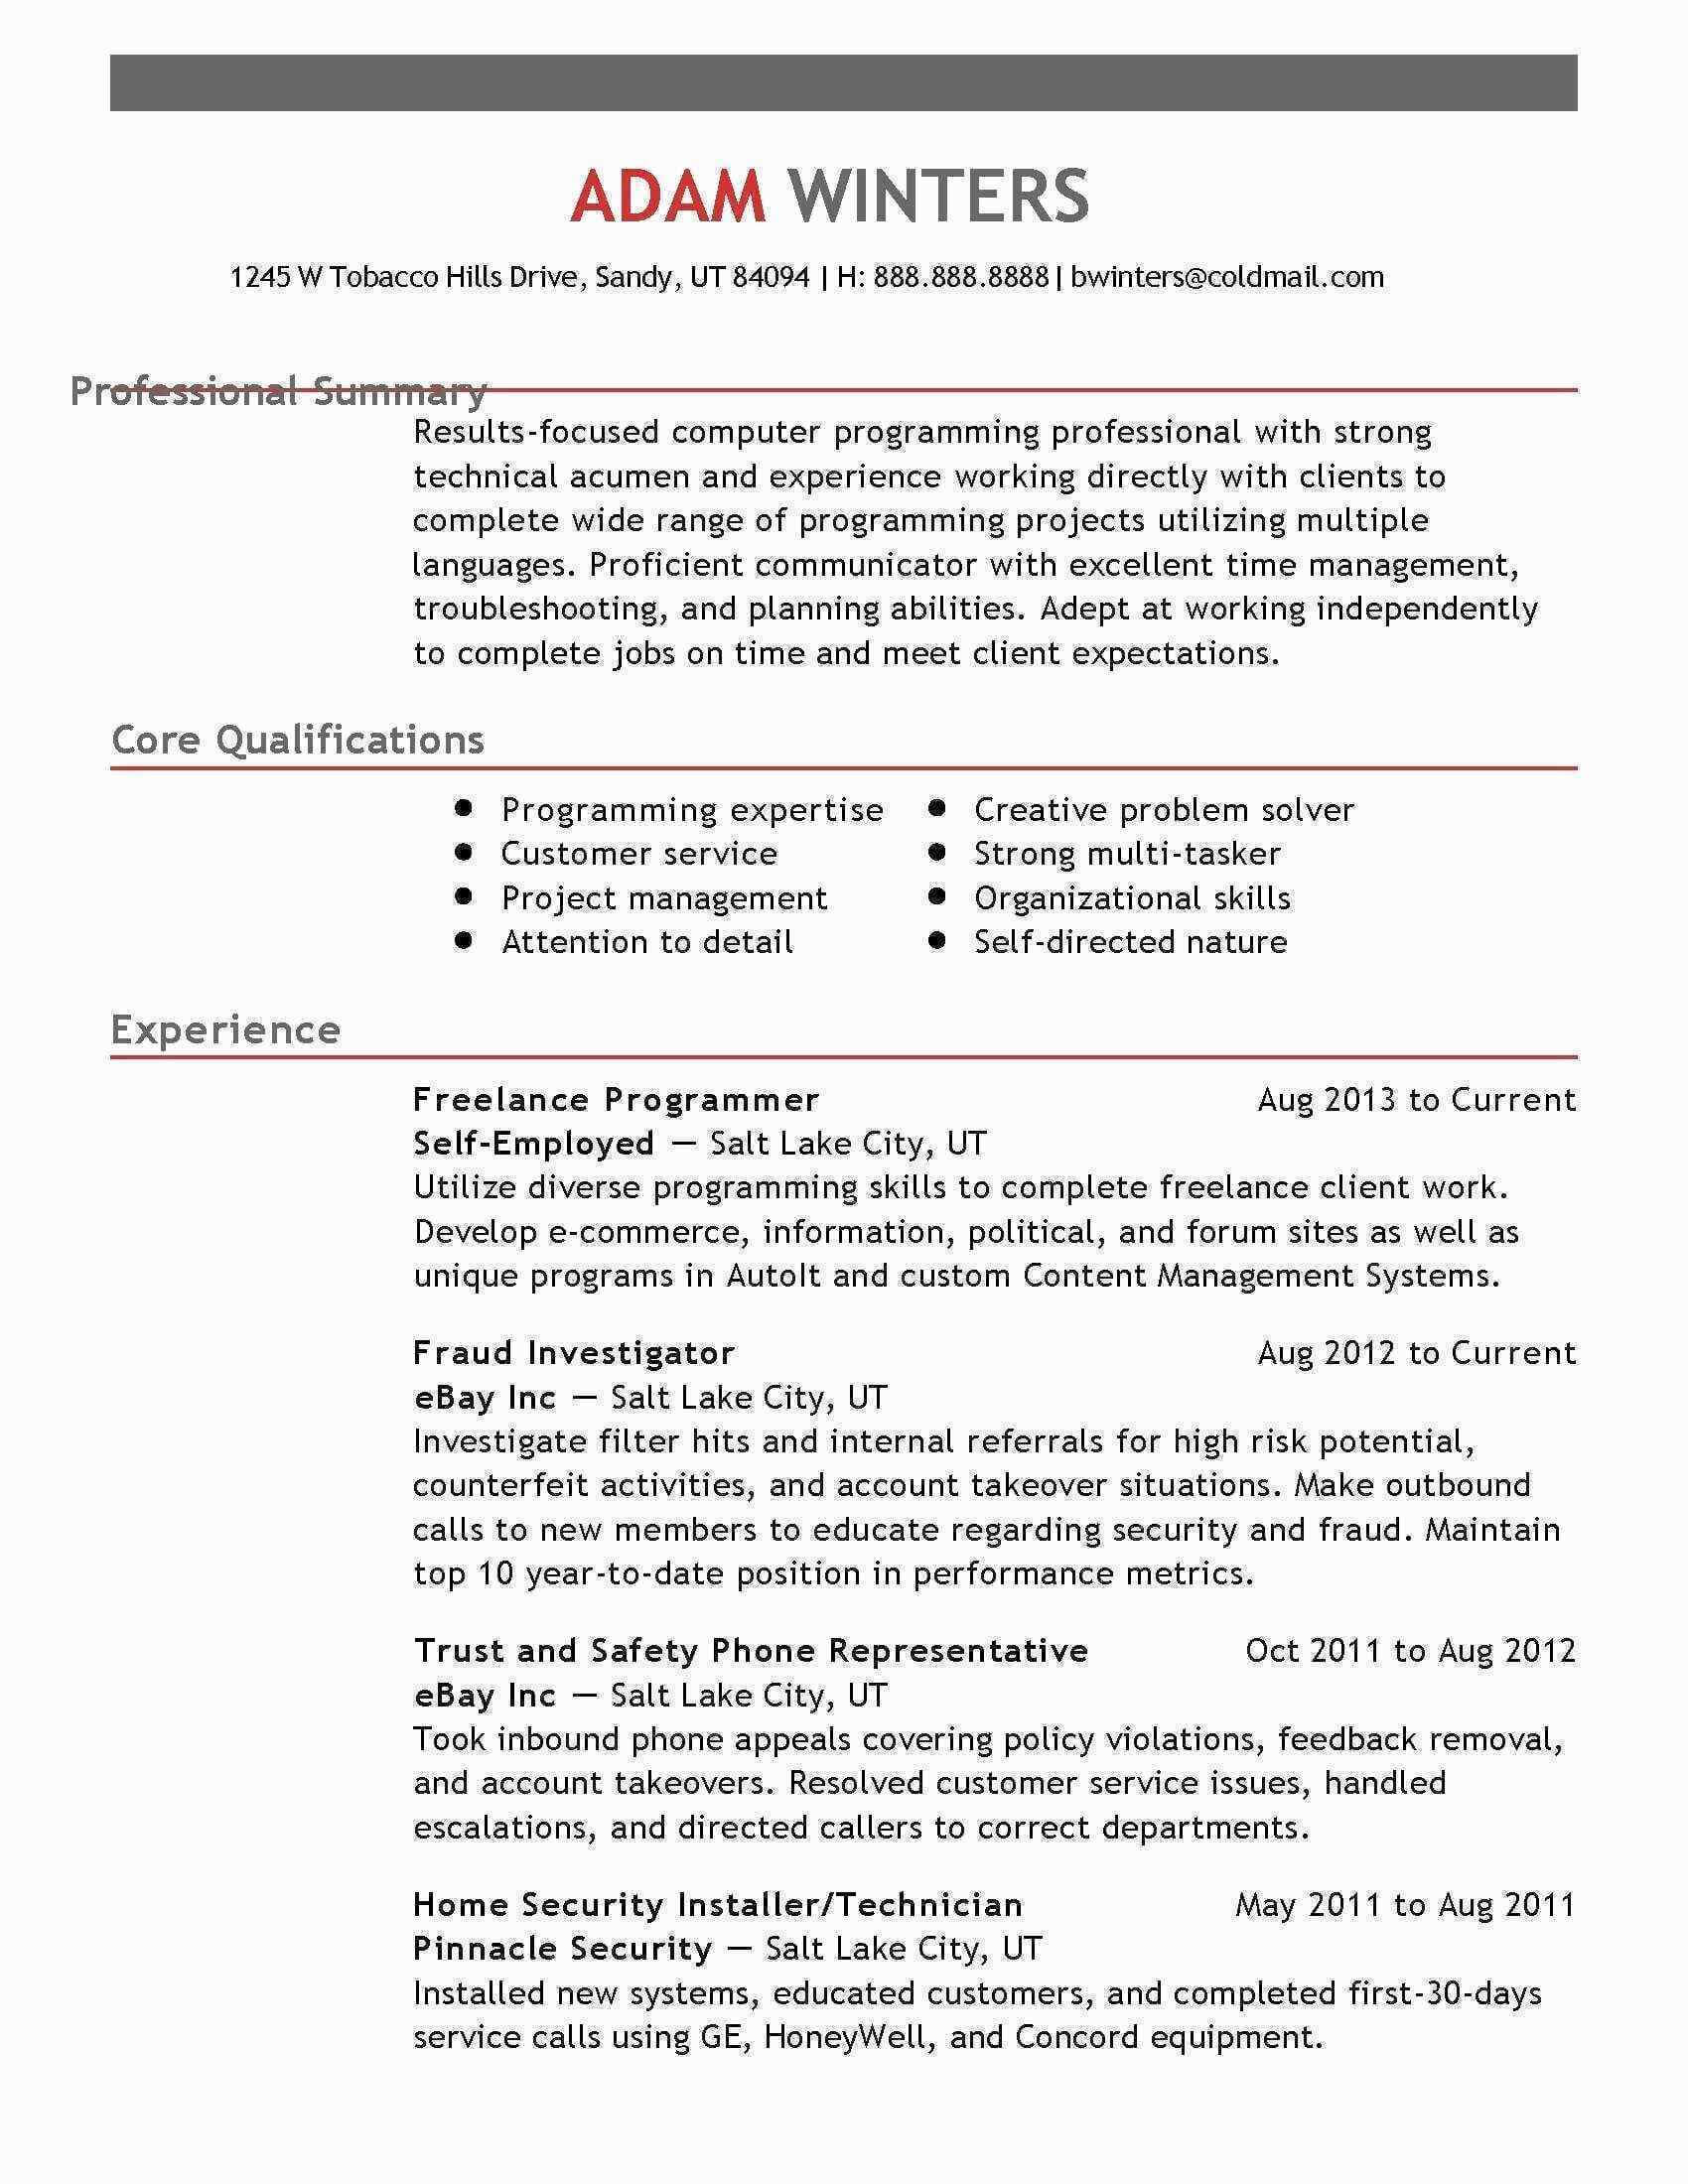 Field Work Report Sample | Glendale Community With Regard To After Training Report Template